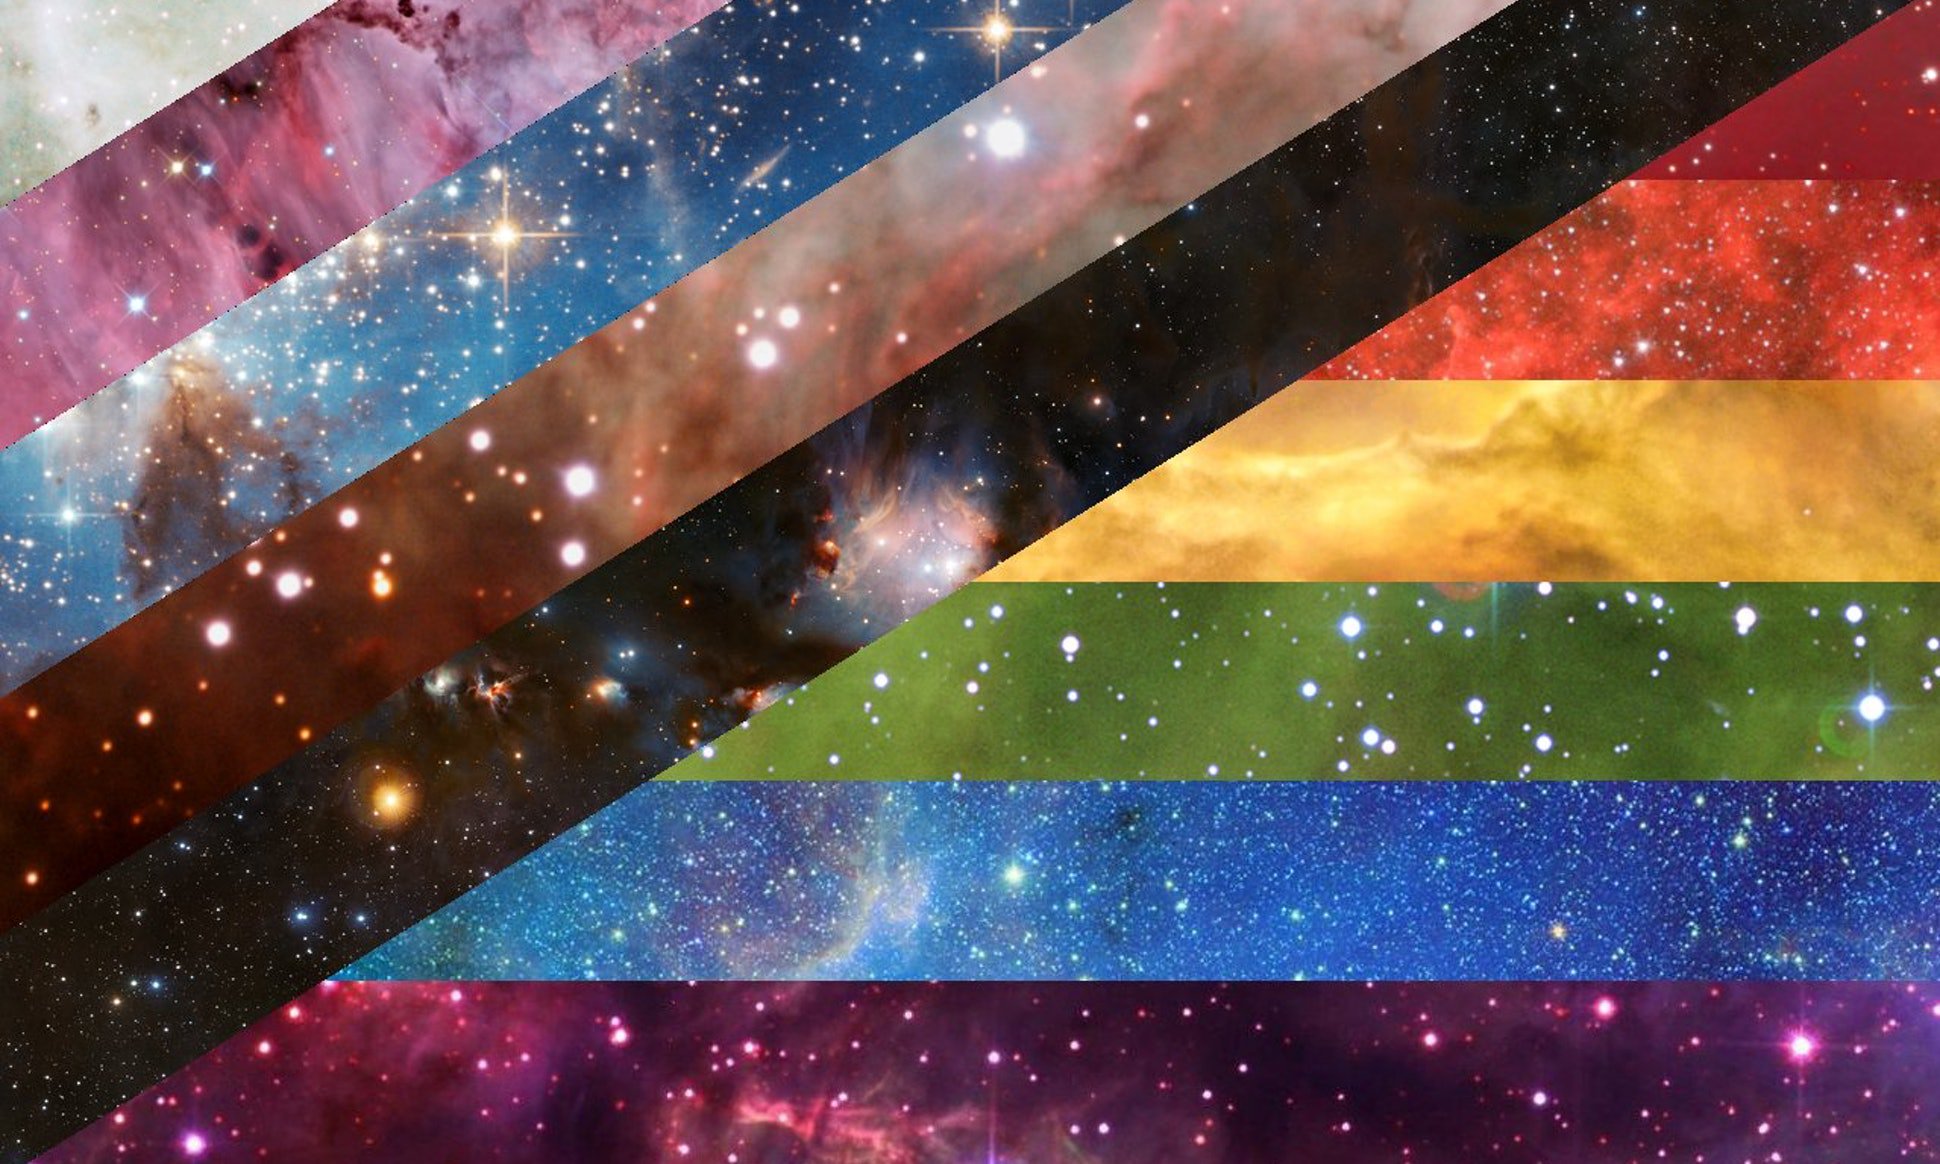 Hubble Space Telescope images assembled into the Pride flag by Laurie Raye